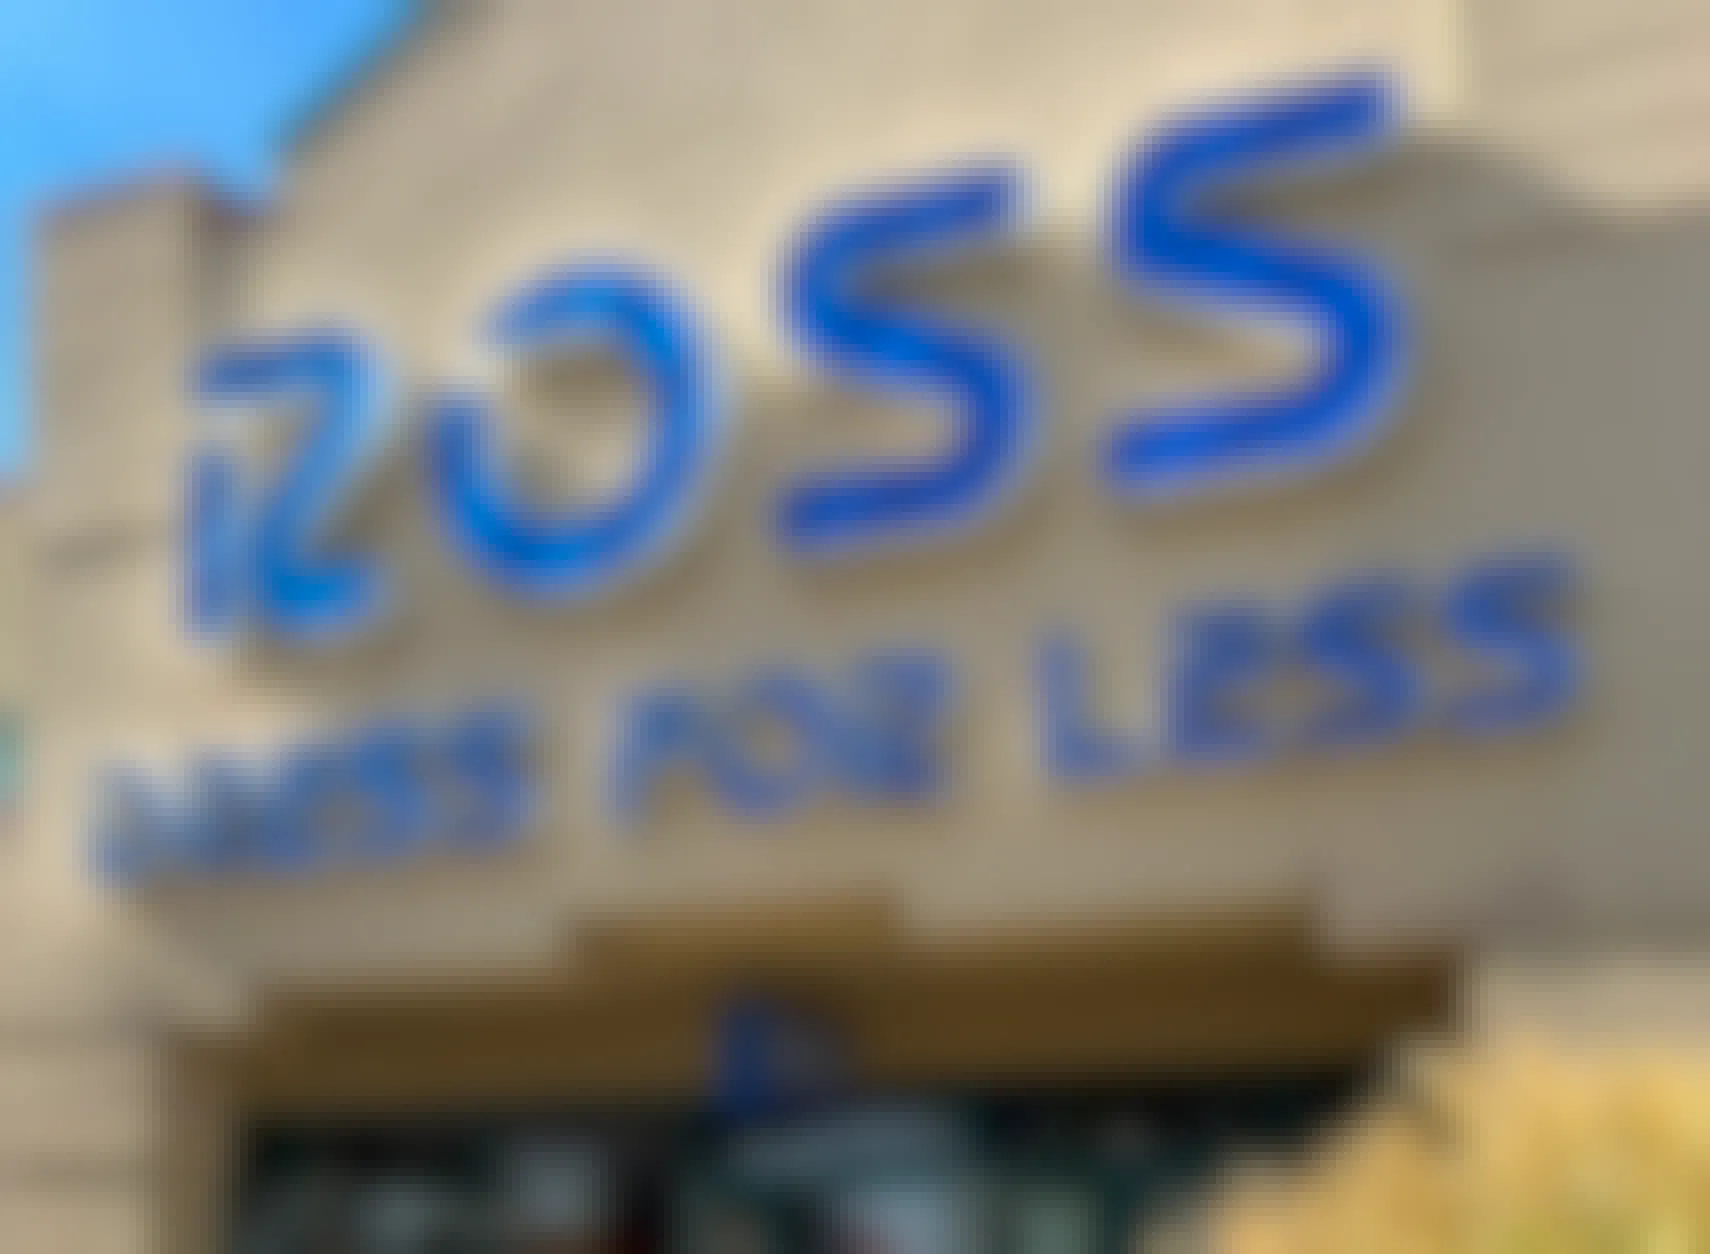 The front view of a Ross Dress for Less store